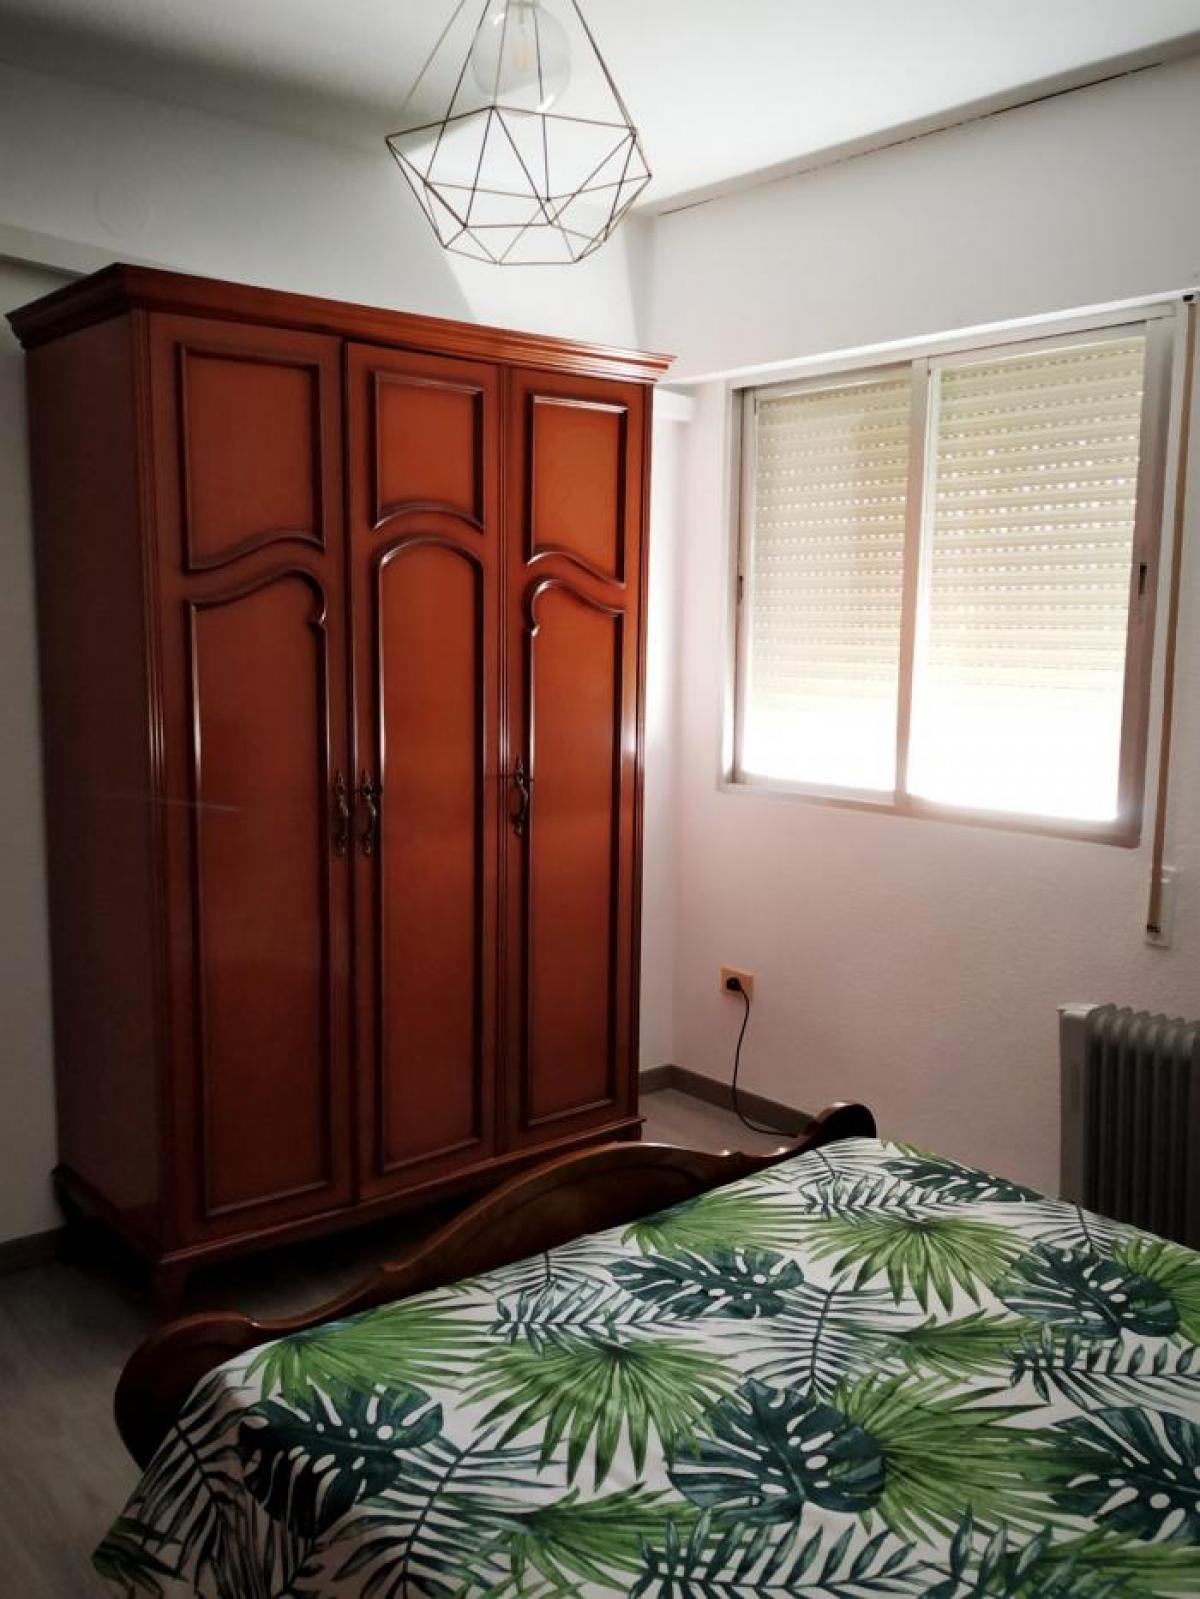 Picture of Apartment For Rent in Cartagena, Murcia, Spain